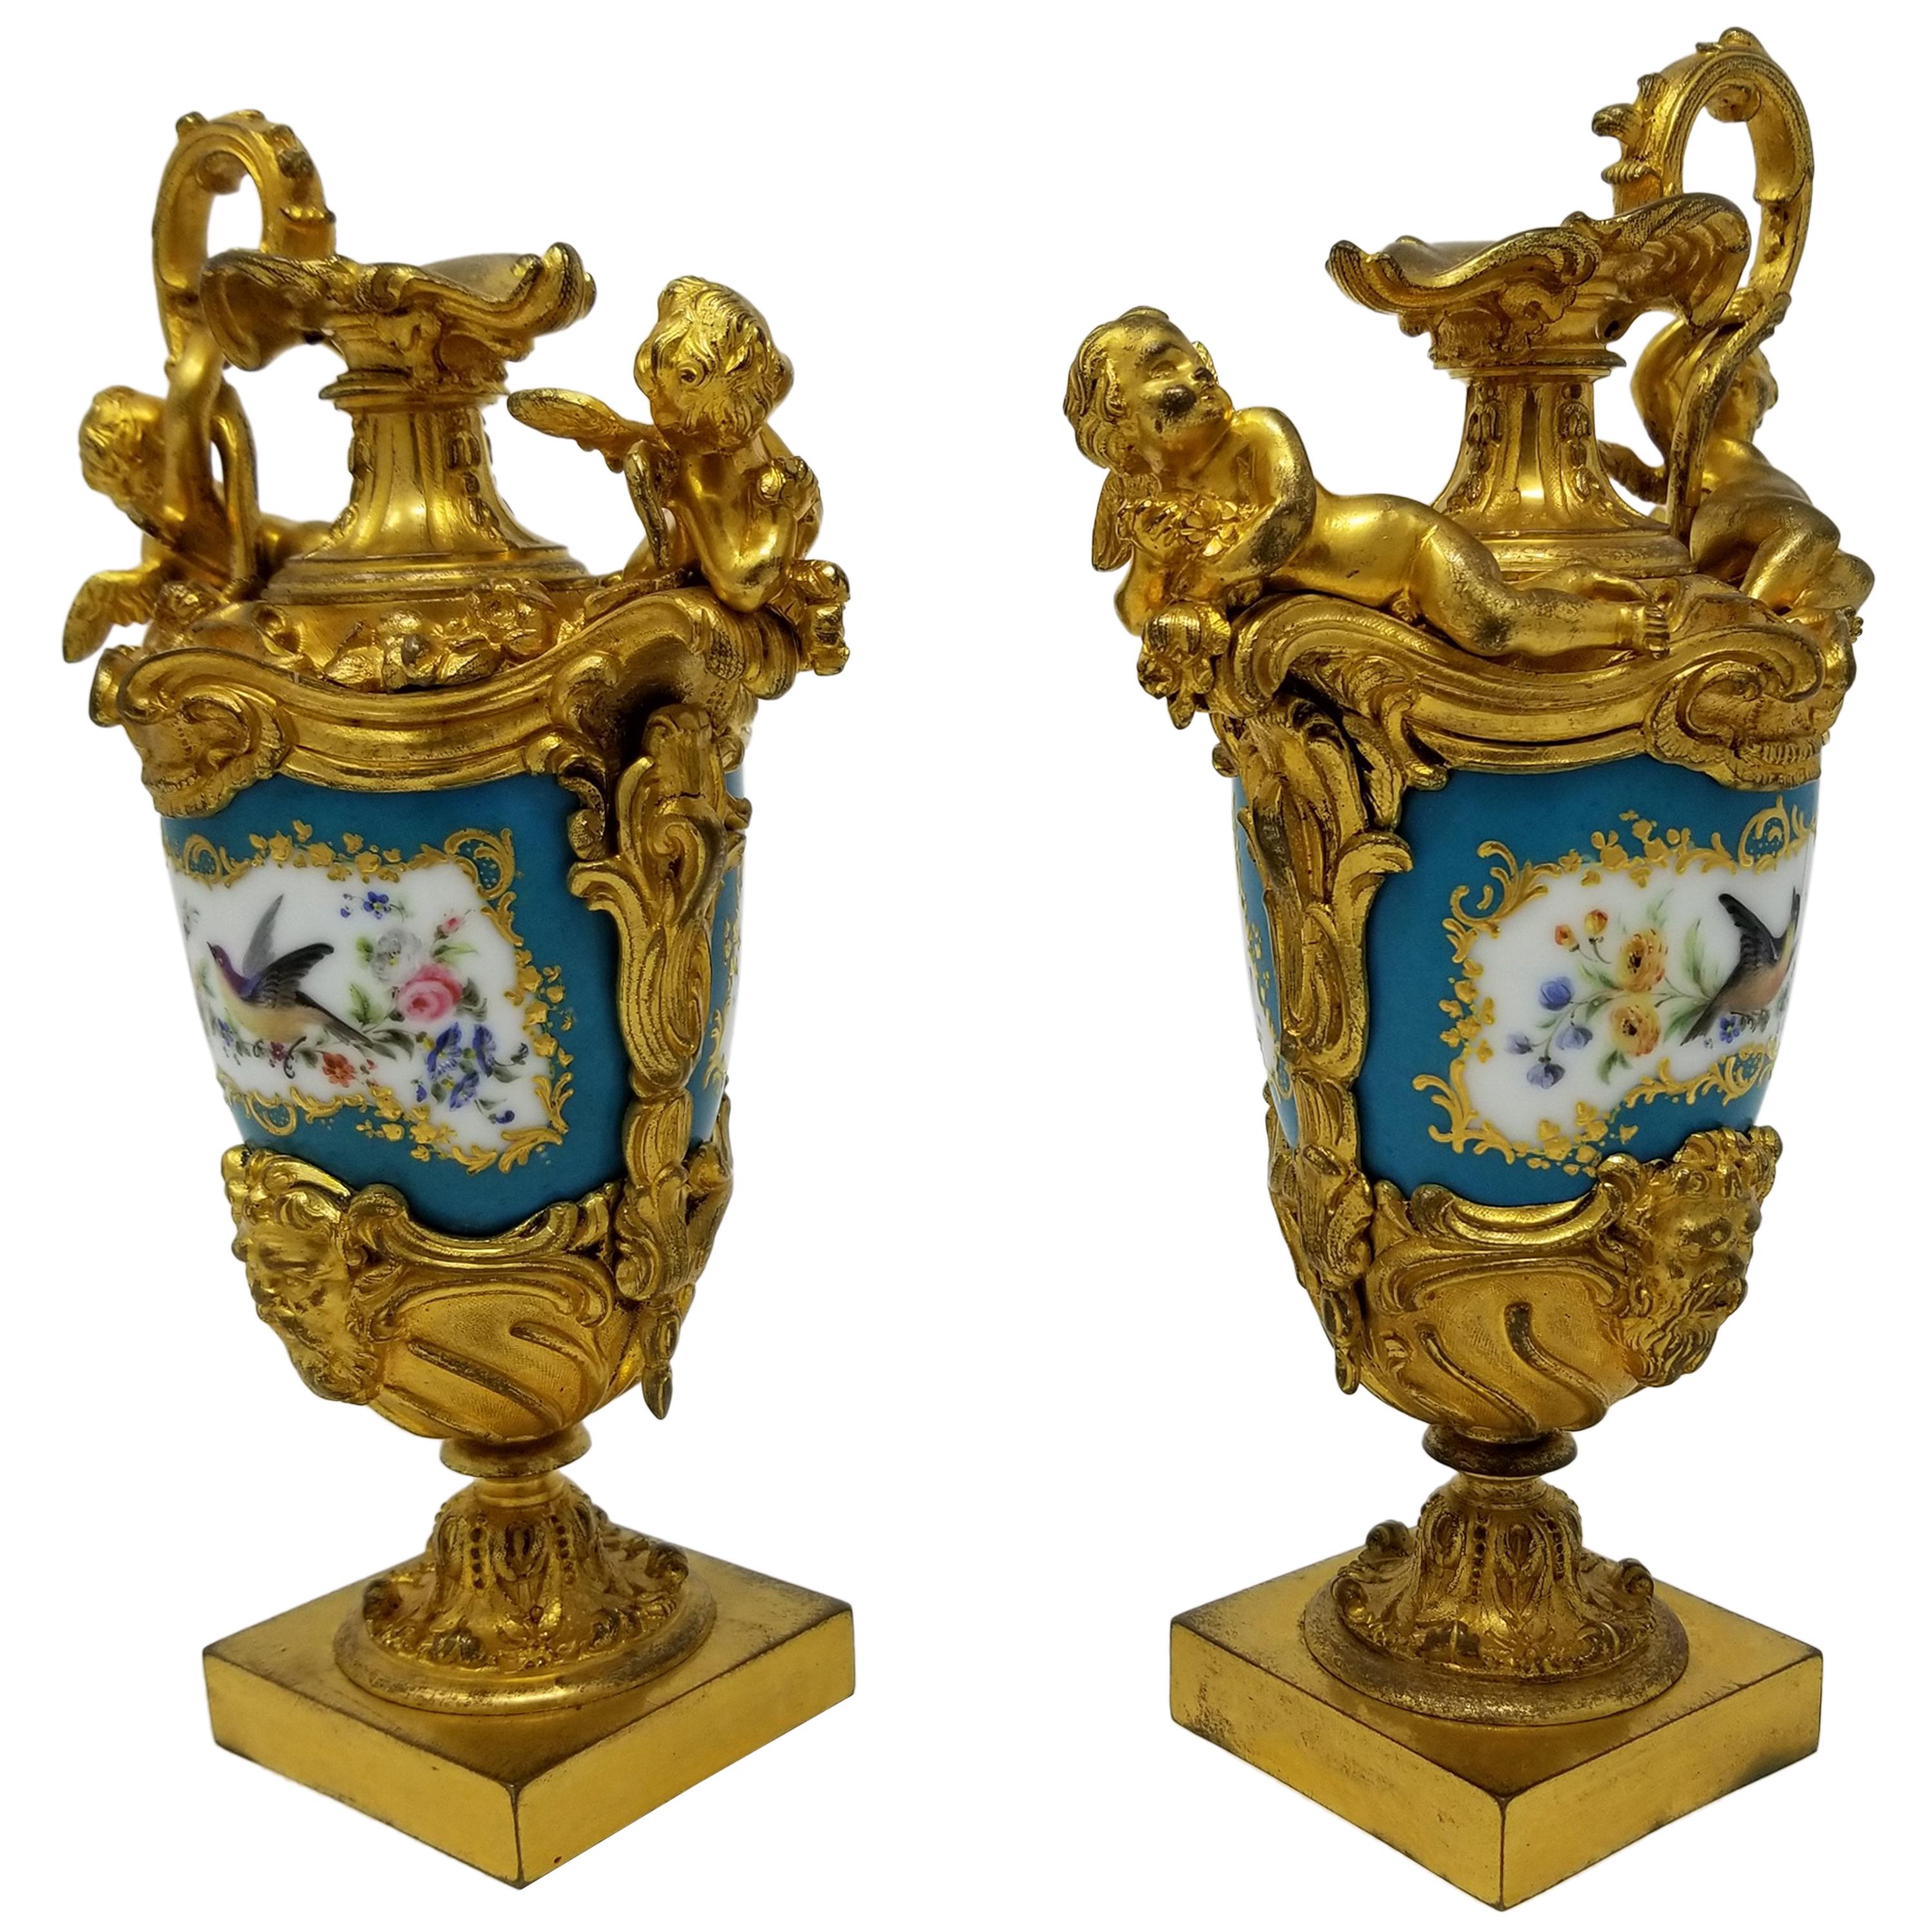 Fine 19th Century French Sèvres Style Porcelain & Doré Bronze-Mounted Ewers For Sale